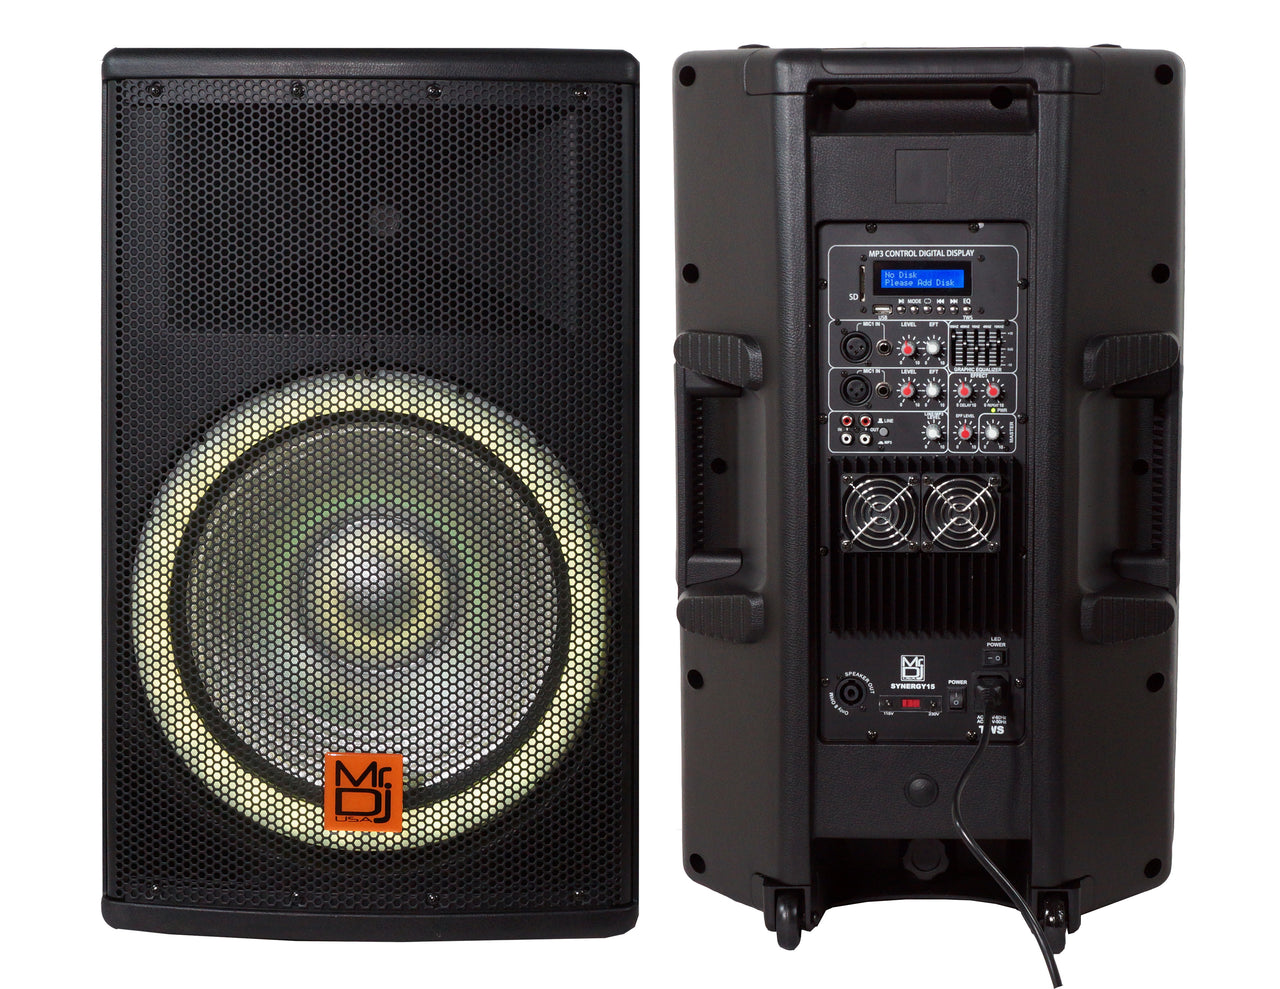 MR DJ SYNERGY15 Pro Audio Indoor Outdoor Ultra Powerful DJ Bluetooth 4500W Watts Peak, 15" Inch Woofer, Rollable Trolley Speaker with Built in Media Player, FM Radio Tuner, USB, SD Card